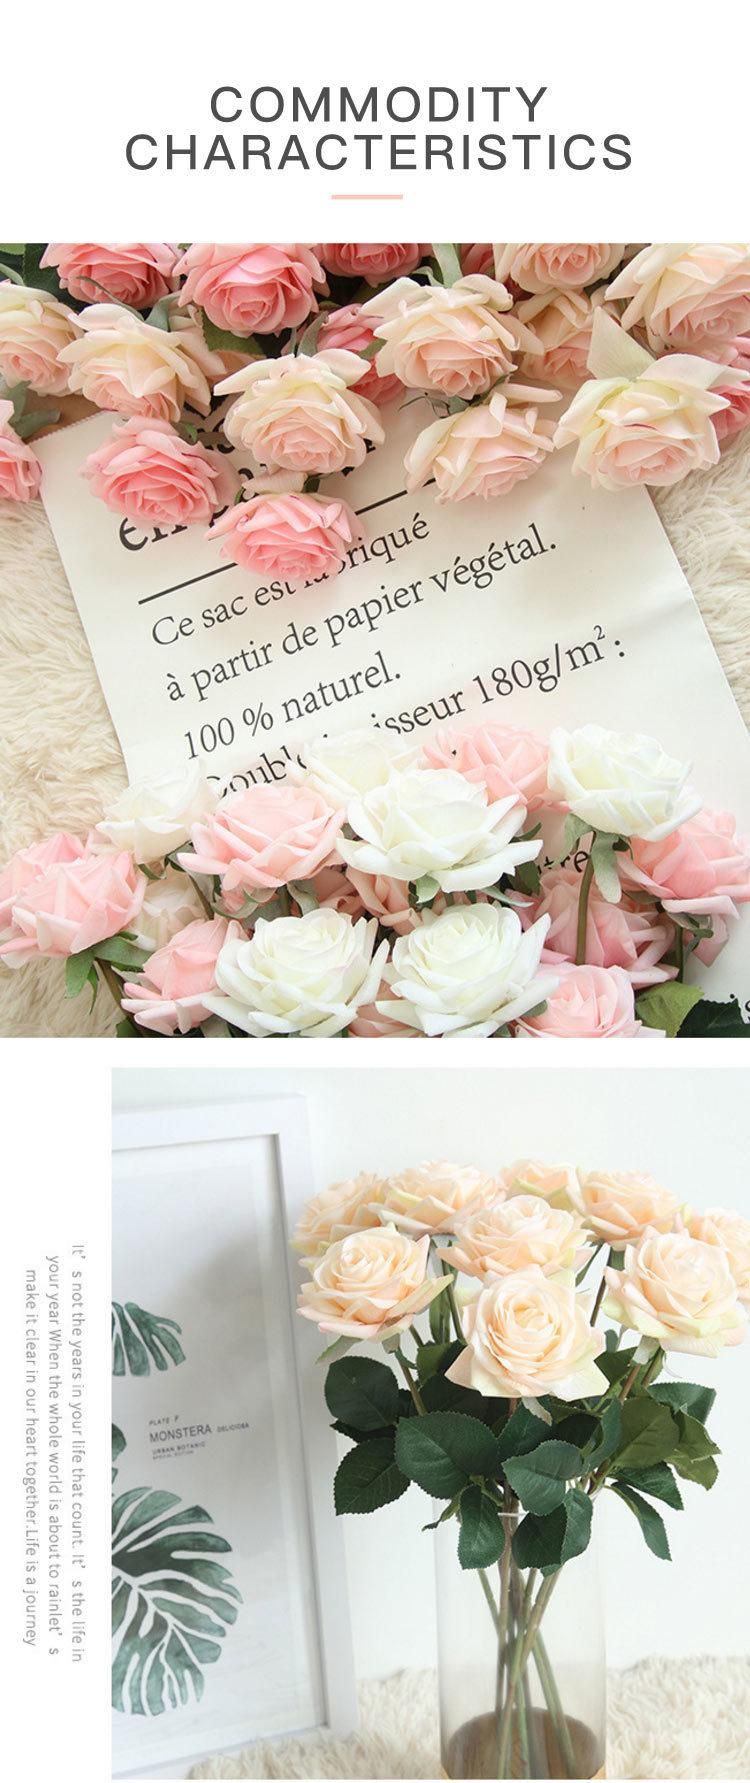 Hot Sale 7 Bunches 21 Heads Rose Flower Artificial Roses with Long Stems for DIY Wedding Bouquets Centerpieces Bridal Shower Party Home Decor